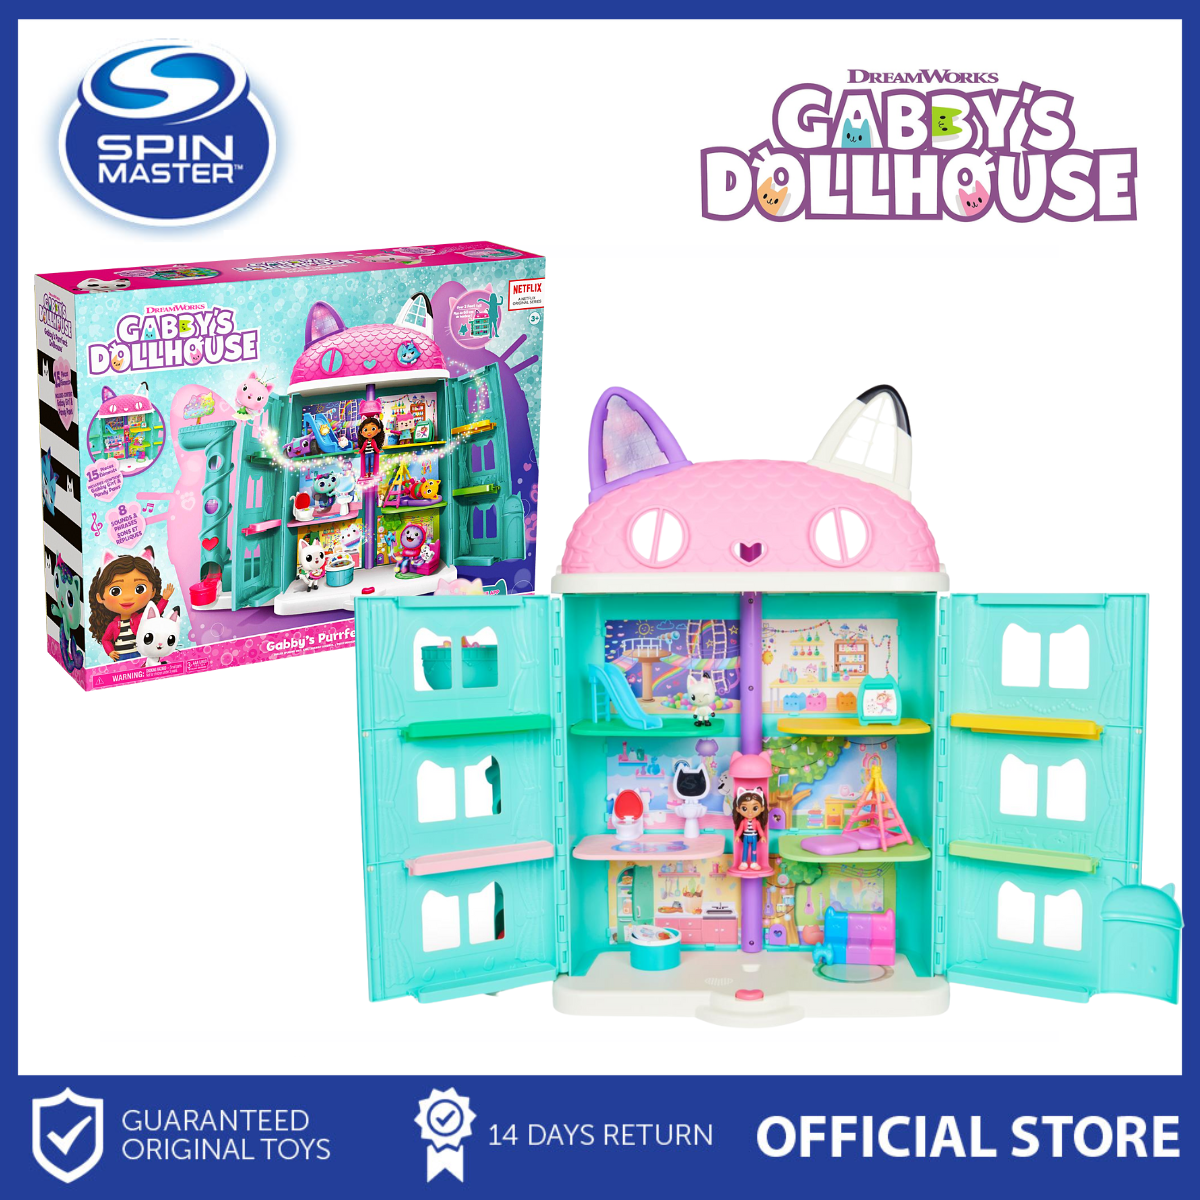  Gabby's Dollhouse, Purrfect Dollhouse with 15 Pieces including  Toy Figures, Furniture, Accessories and Sounds, Kids Toys for Ages 3 and up  : Toys & Games